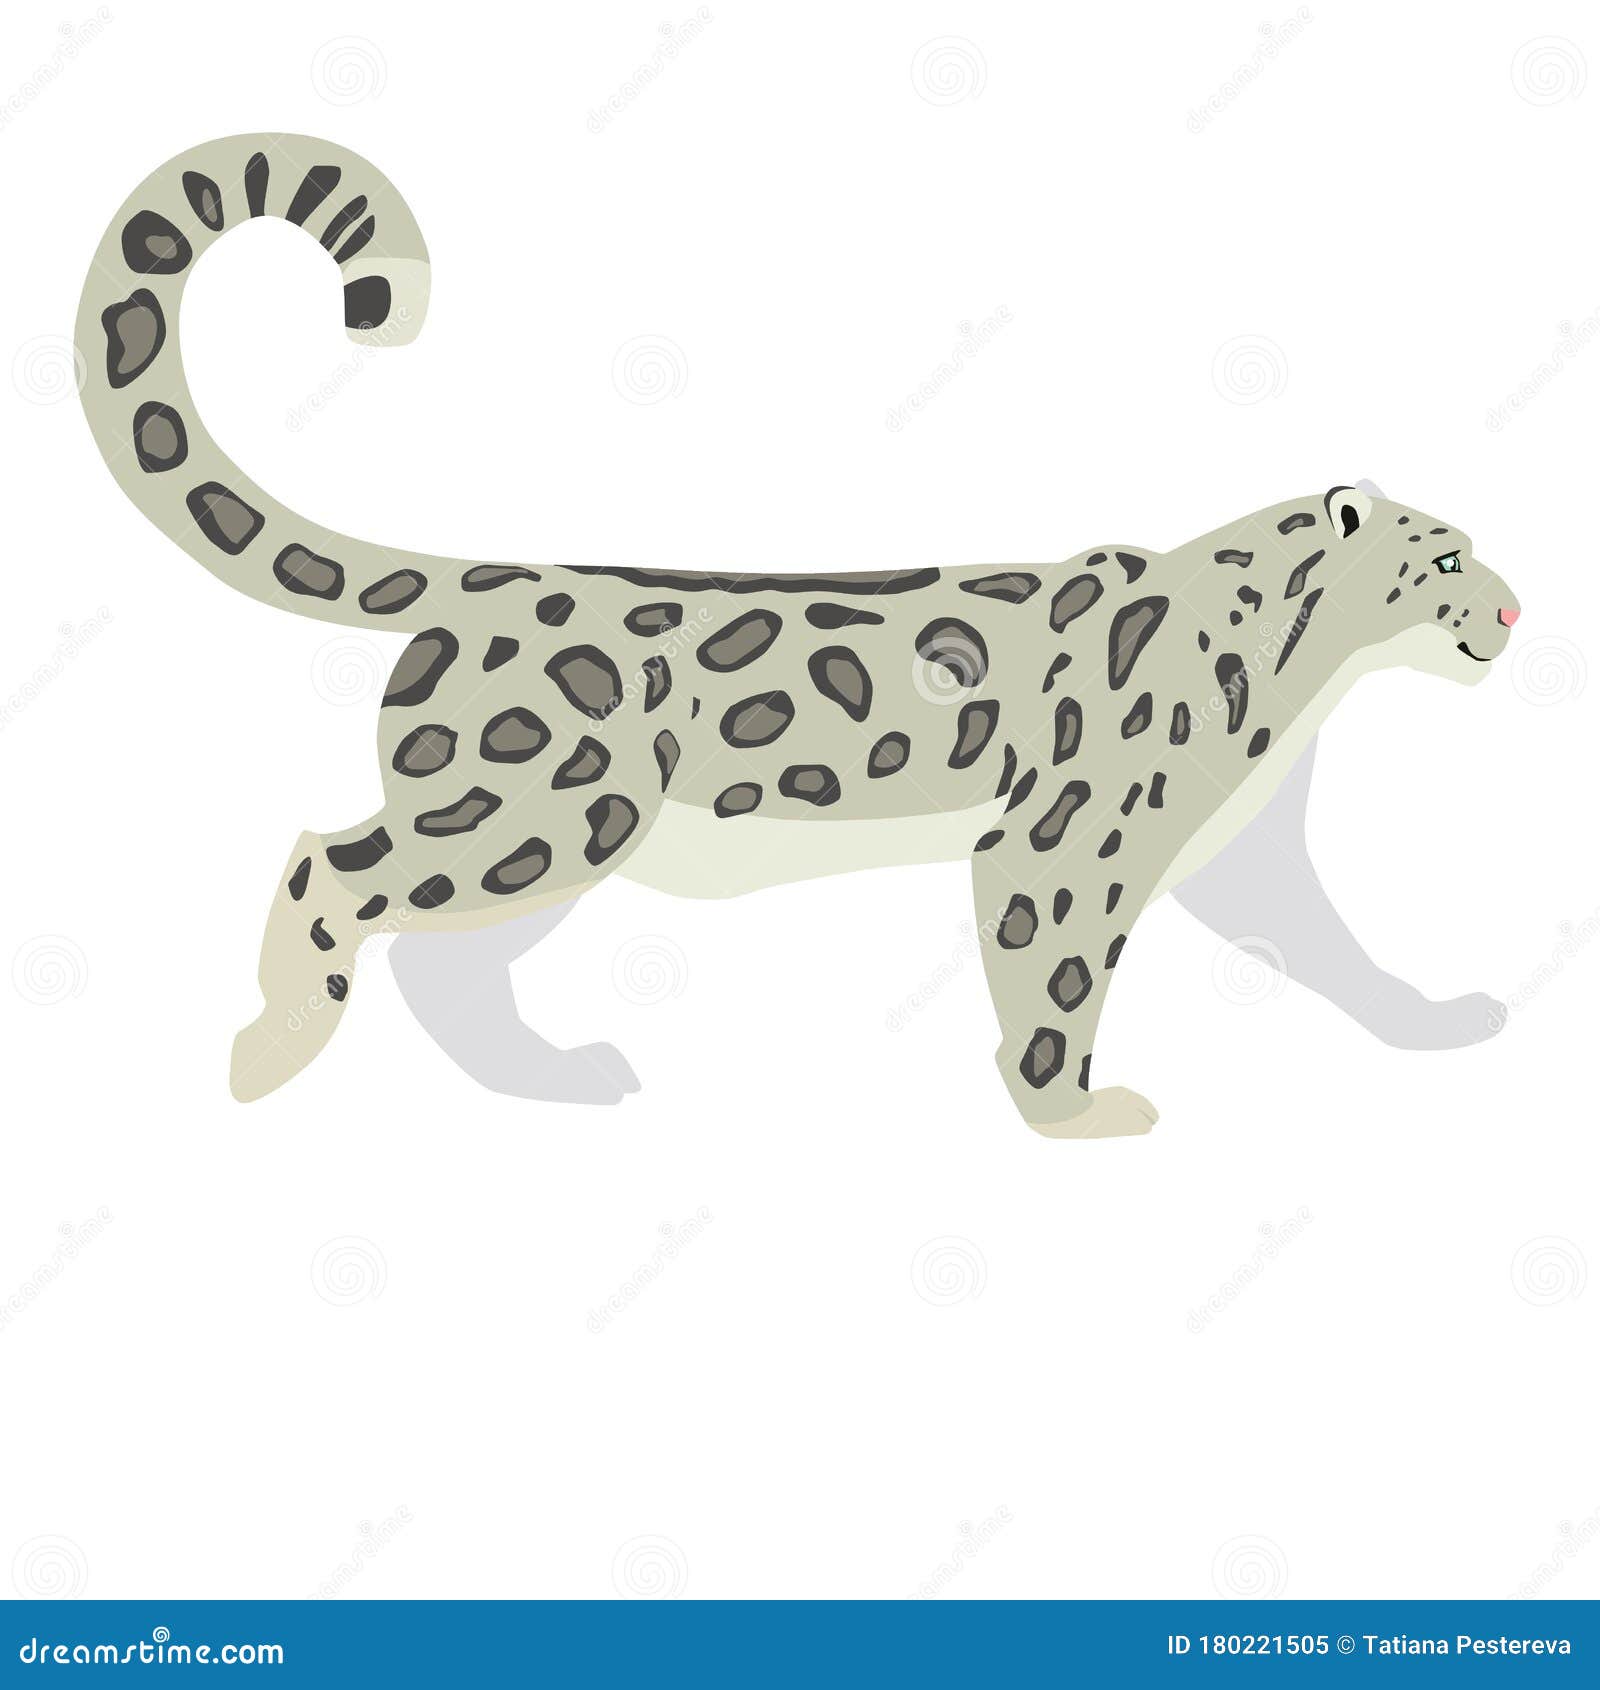 Snow leopard stock vector. Illustration of character - 180221505